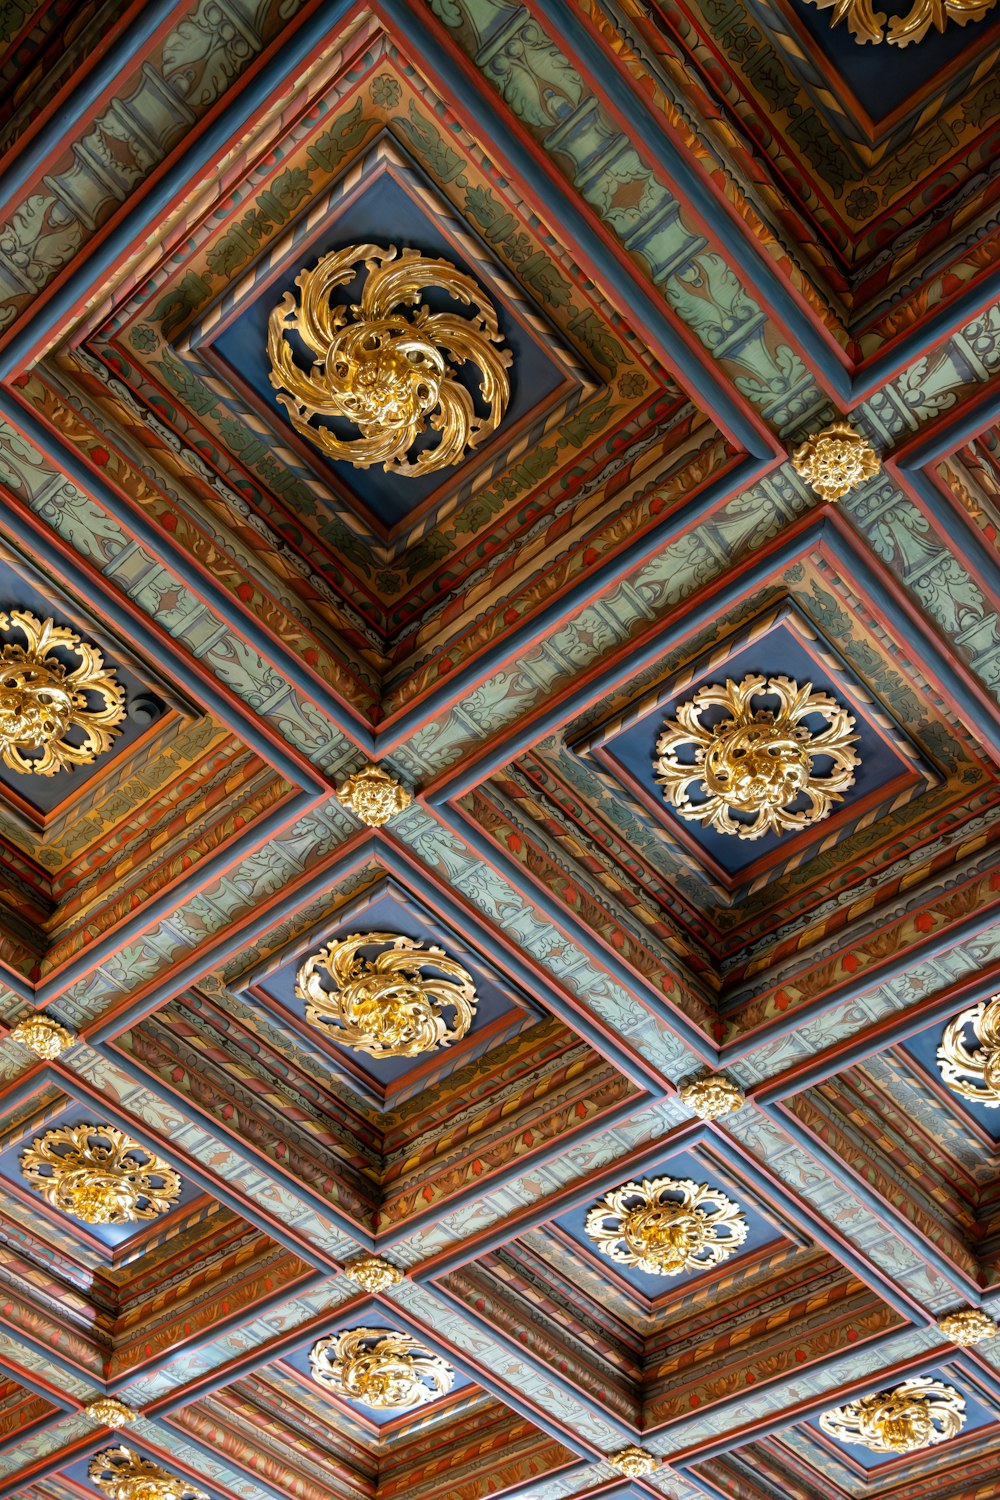 the ceiling of a building with ornate designs on it